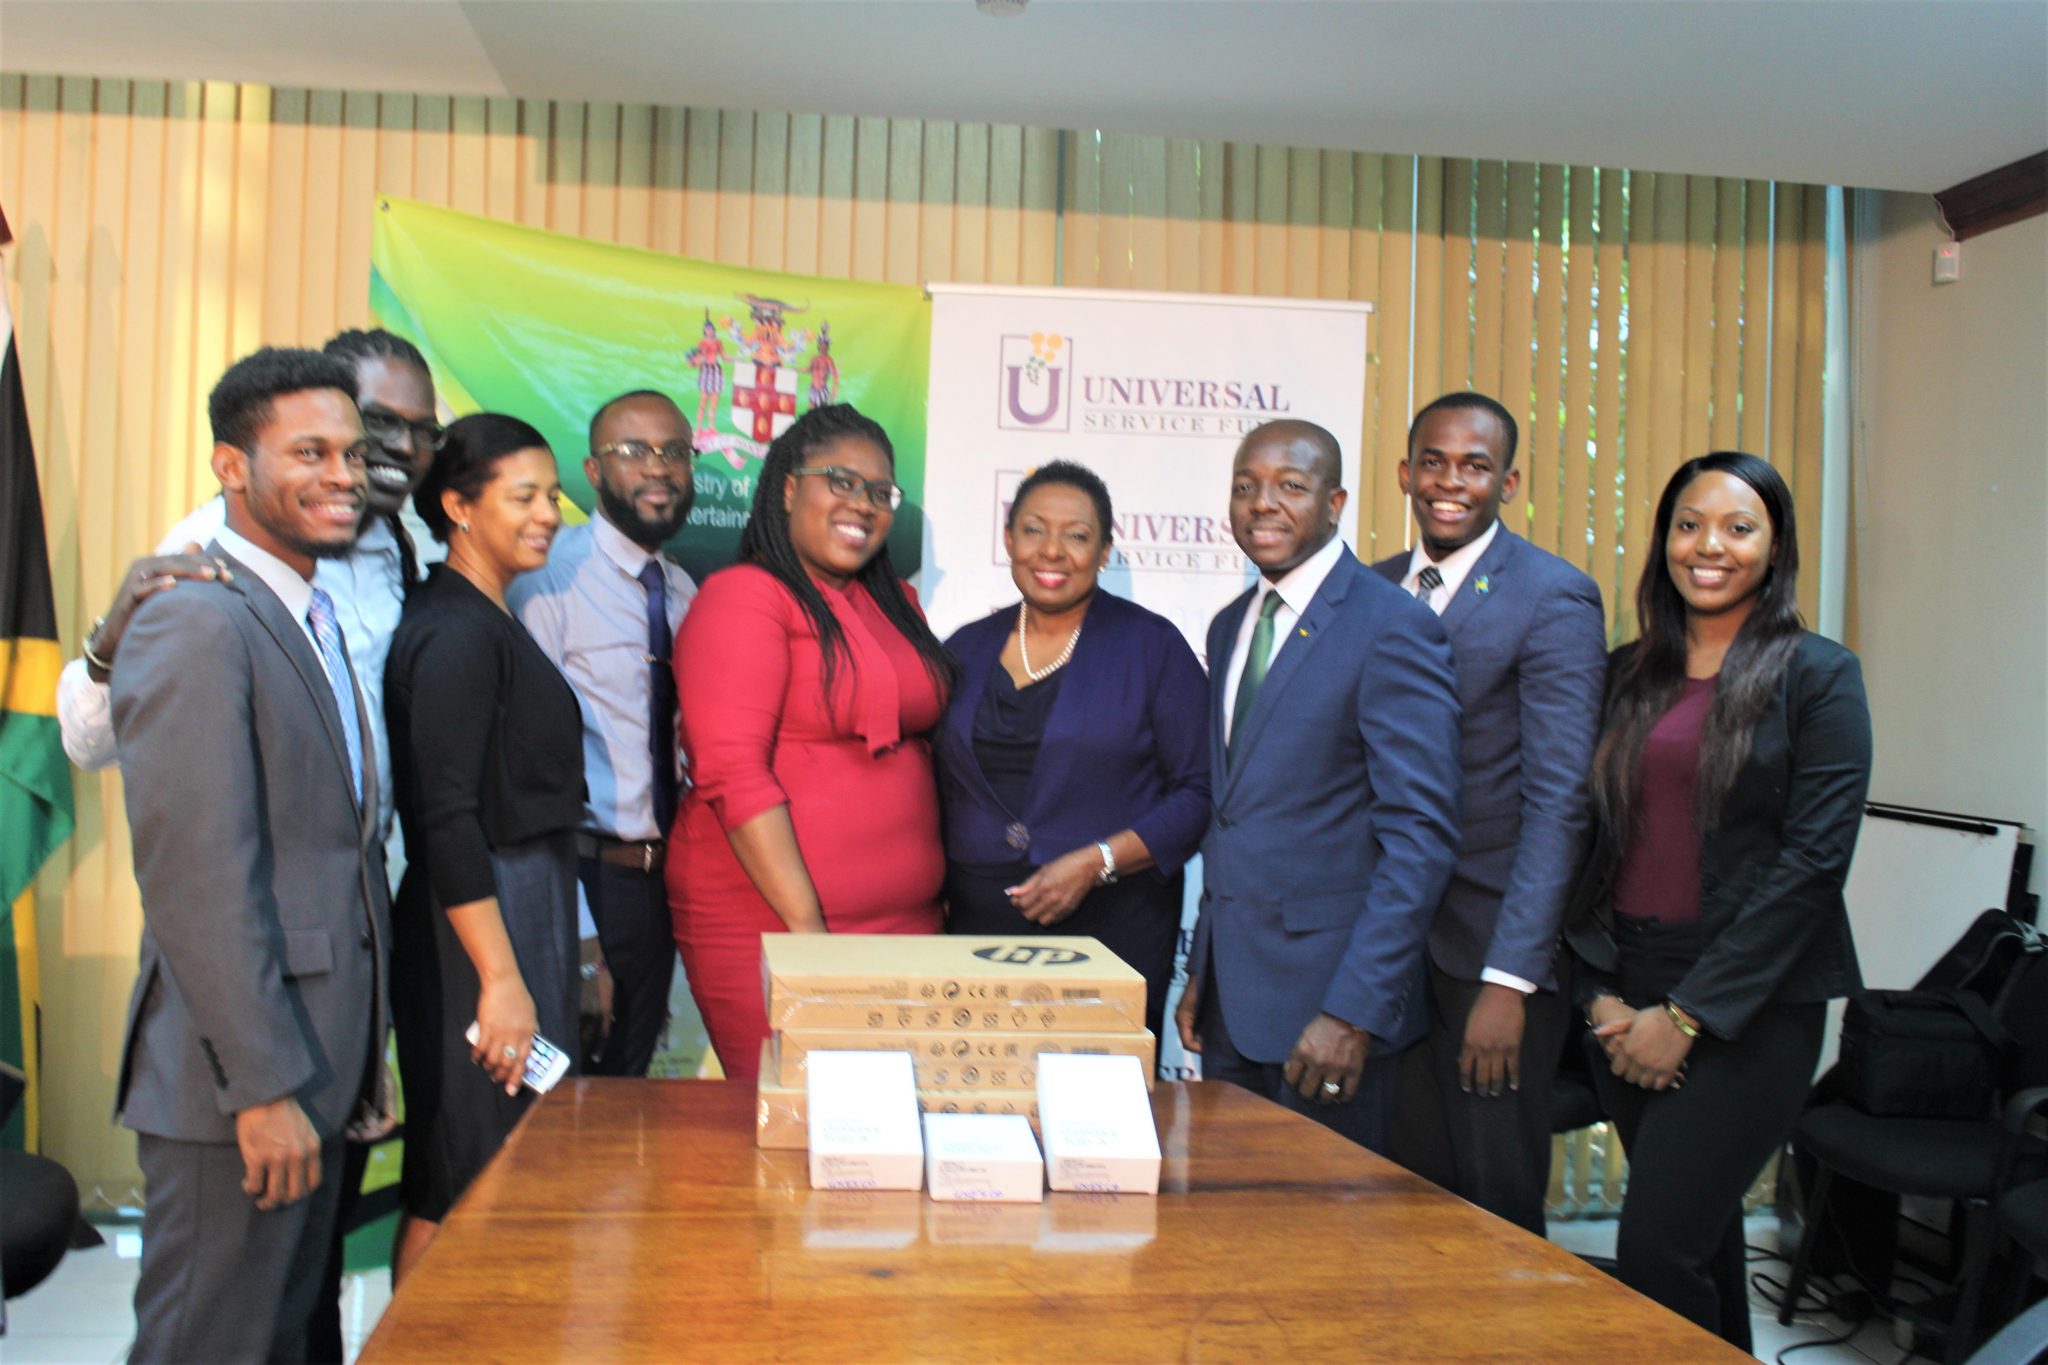 The Universal Service Fund Donates Equipment to UNESCO Youth Advisory Committee